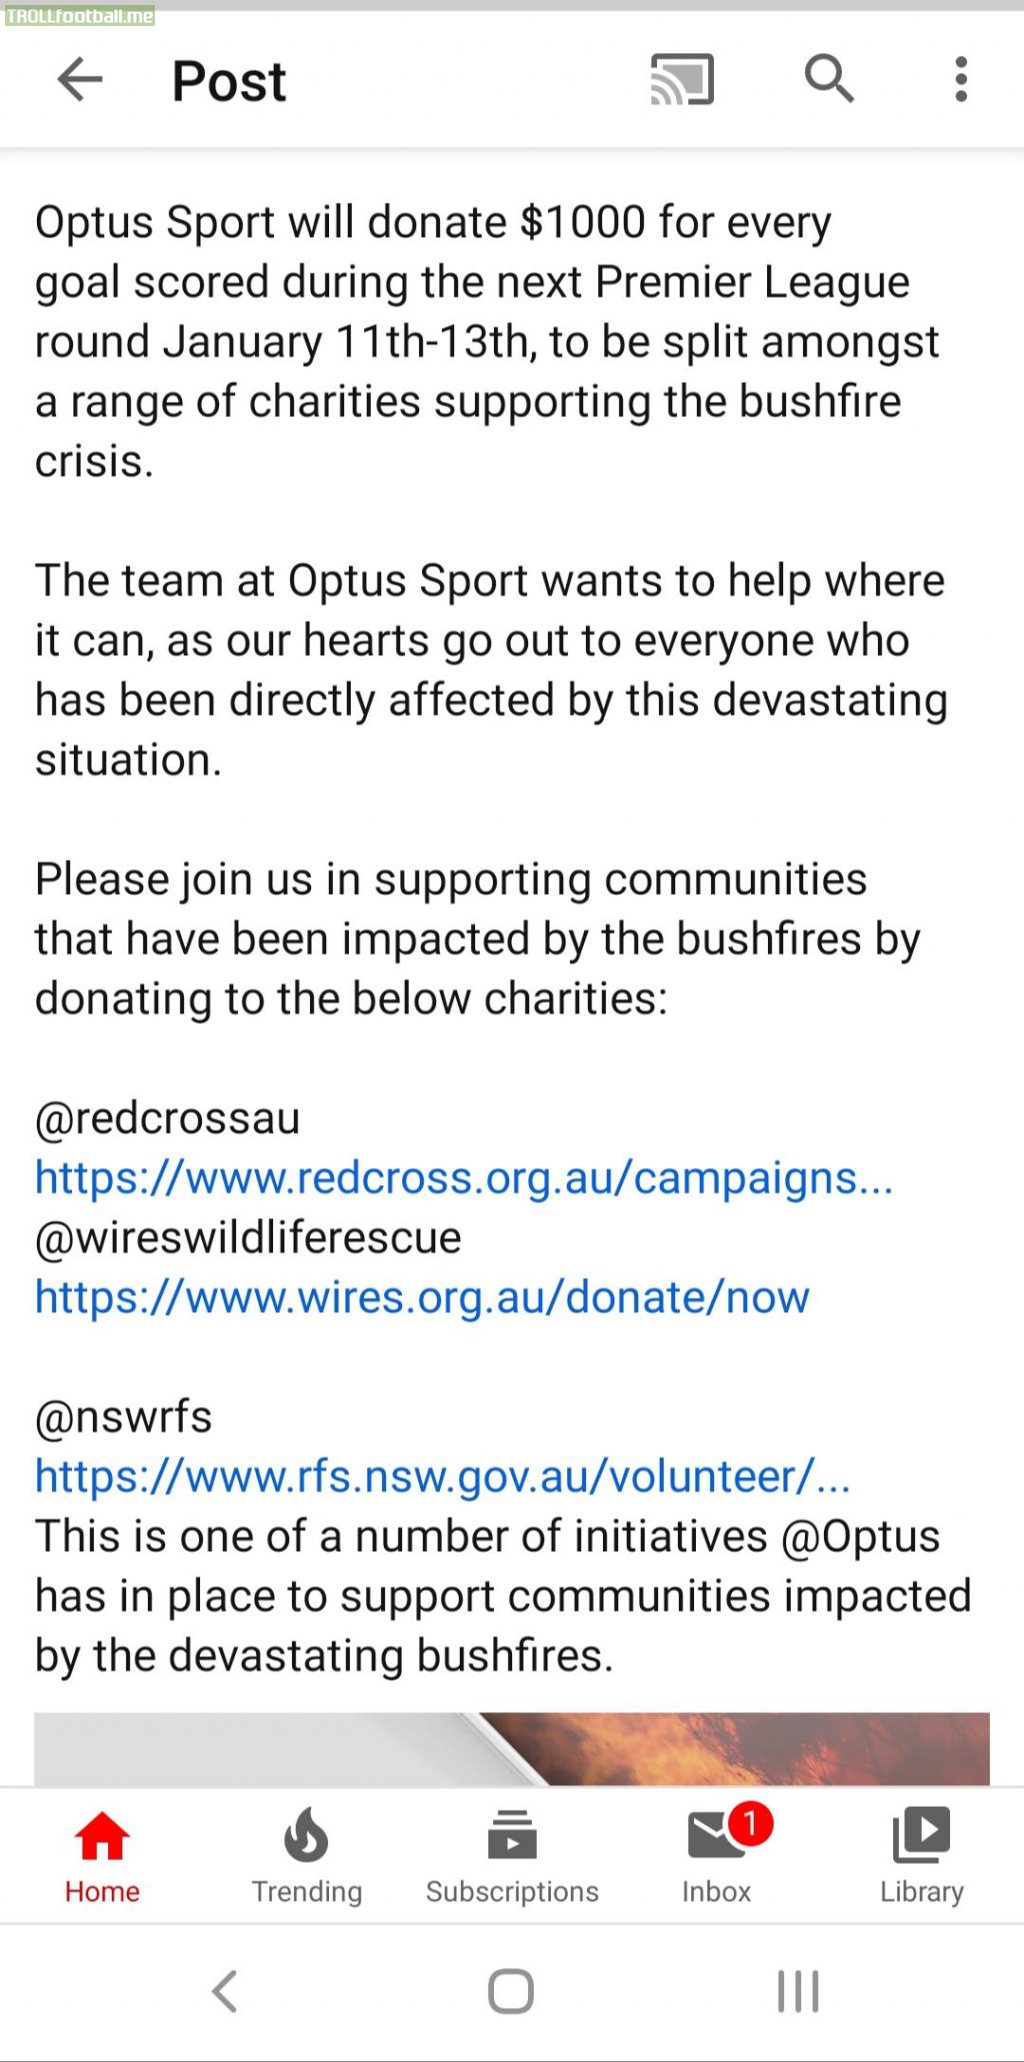 Optus sport will donate 1000$ to Australian bushfire charities for every goal thats scored in the next priemier league round